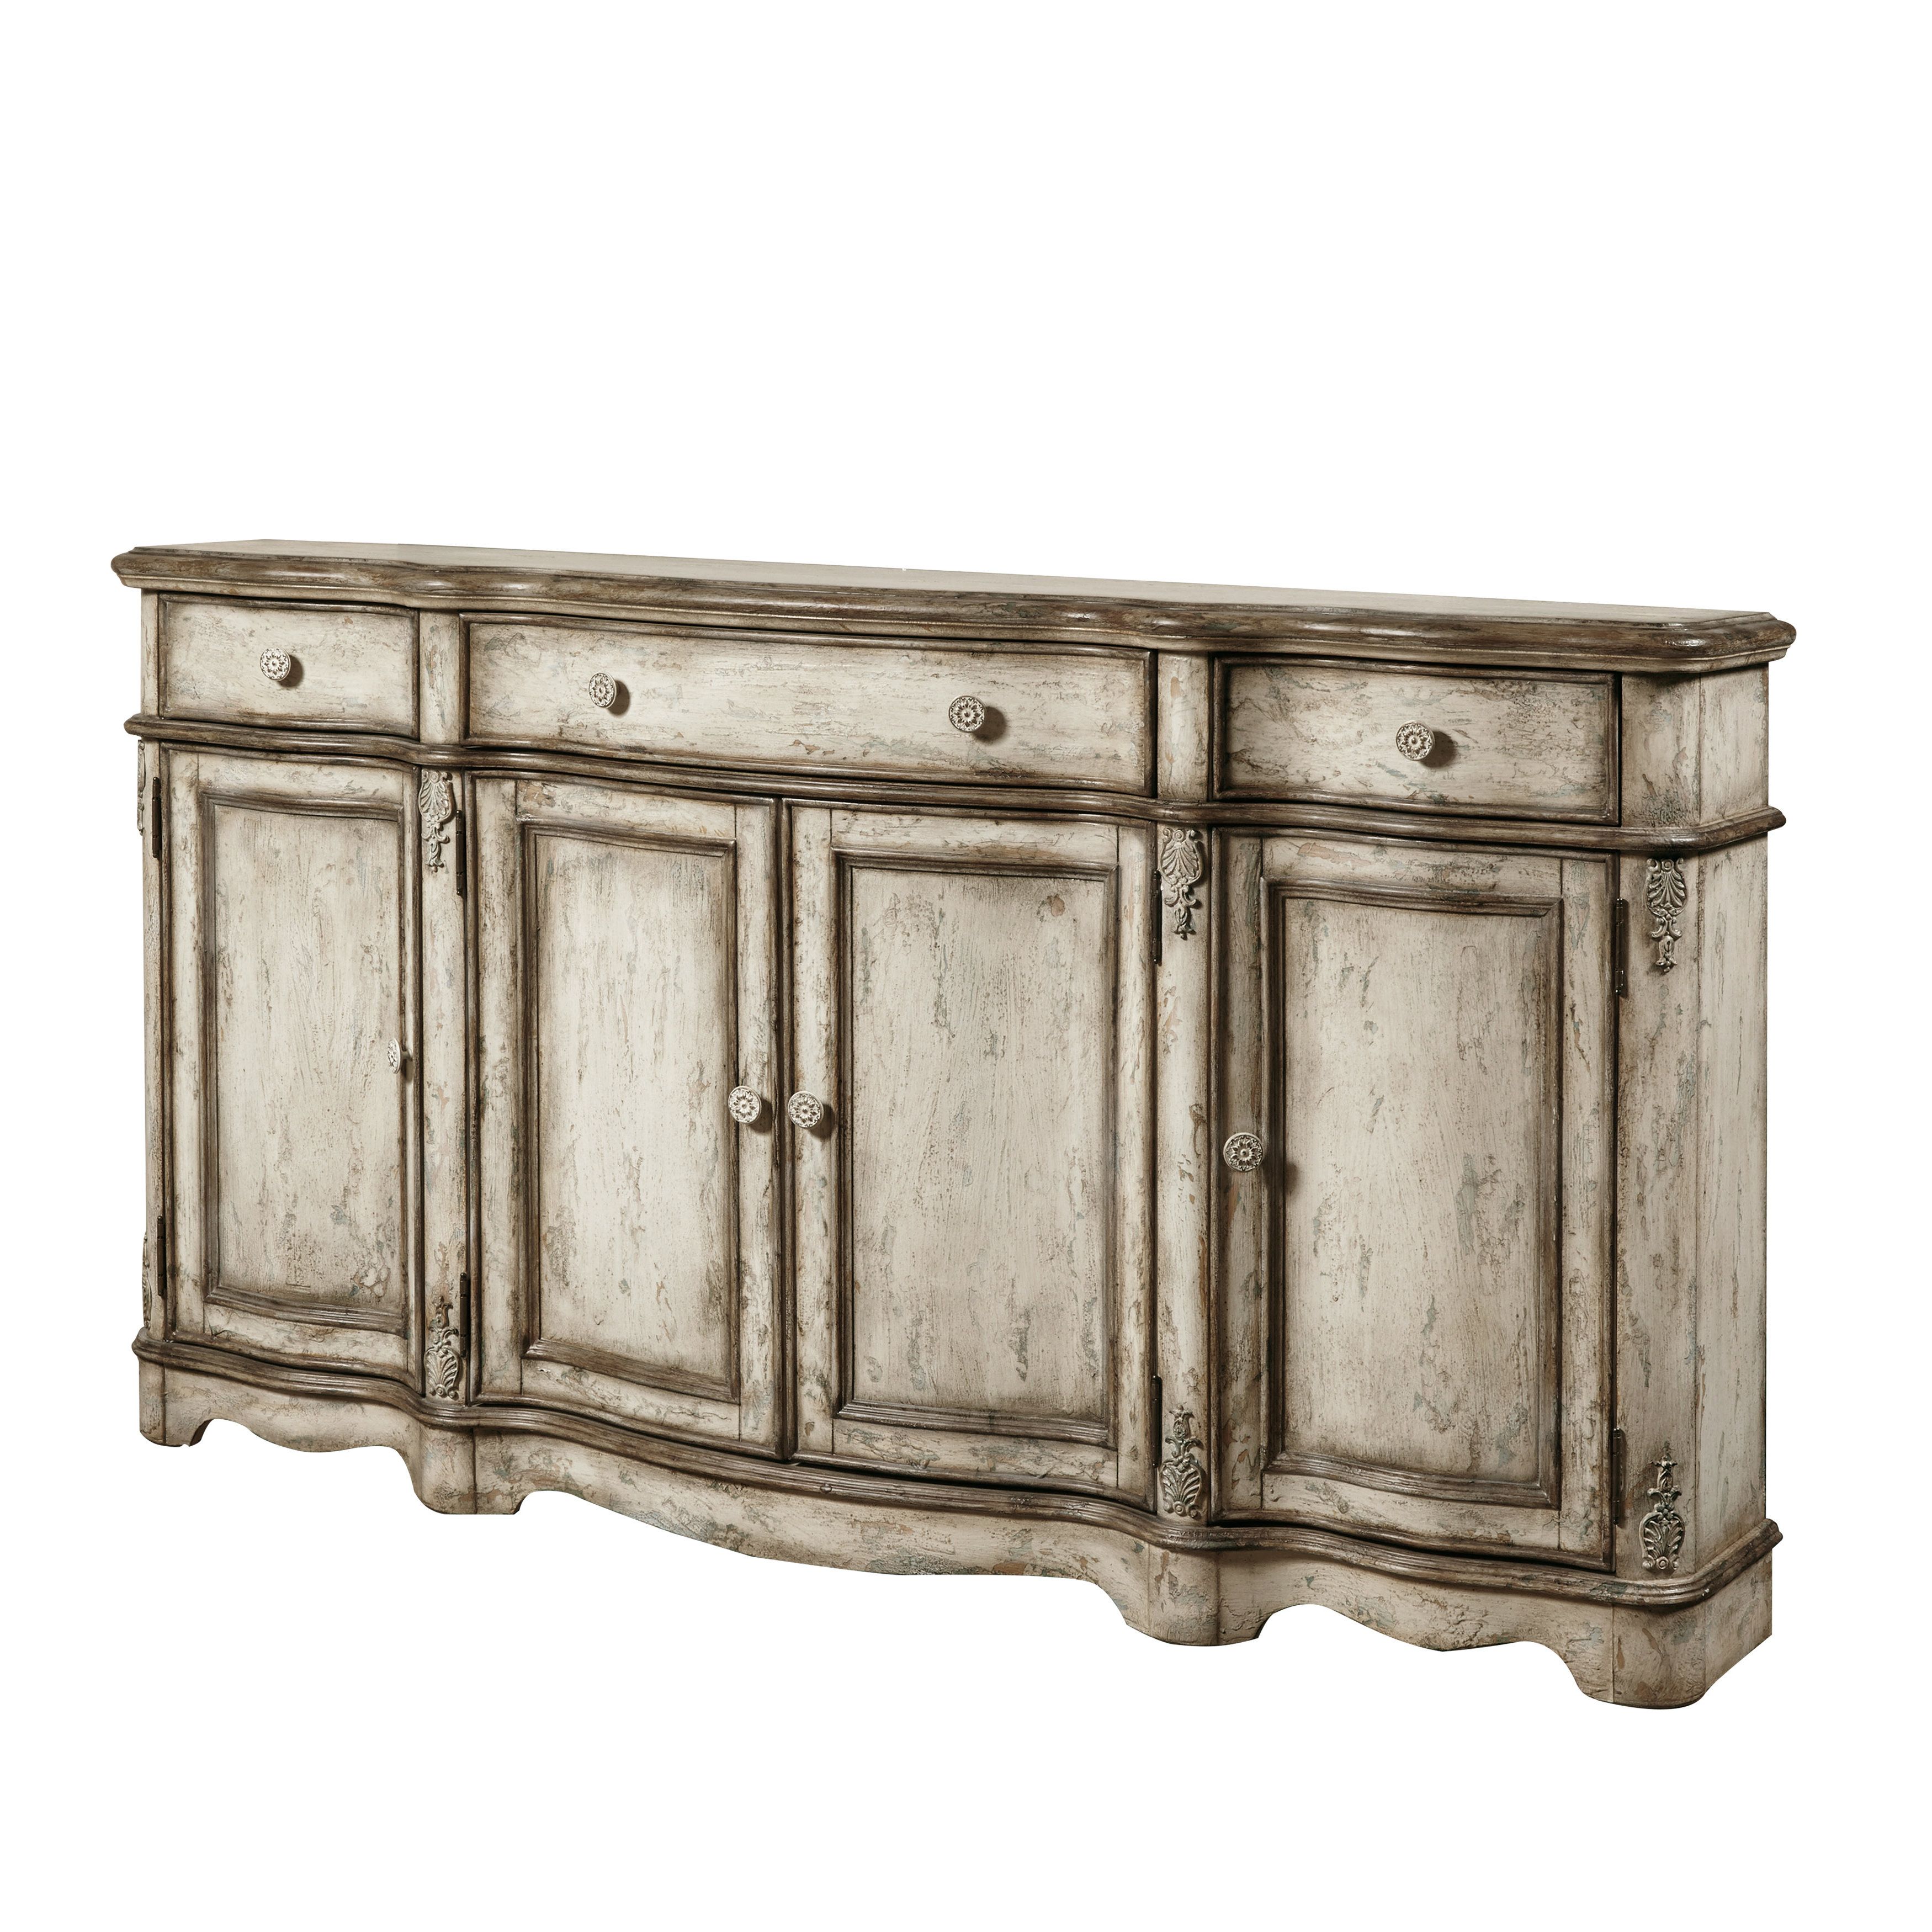 Ilyan Traditional Wood Sideboard Within Most Recently Released Deville Russelle Sideboards (View 3 of 20)